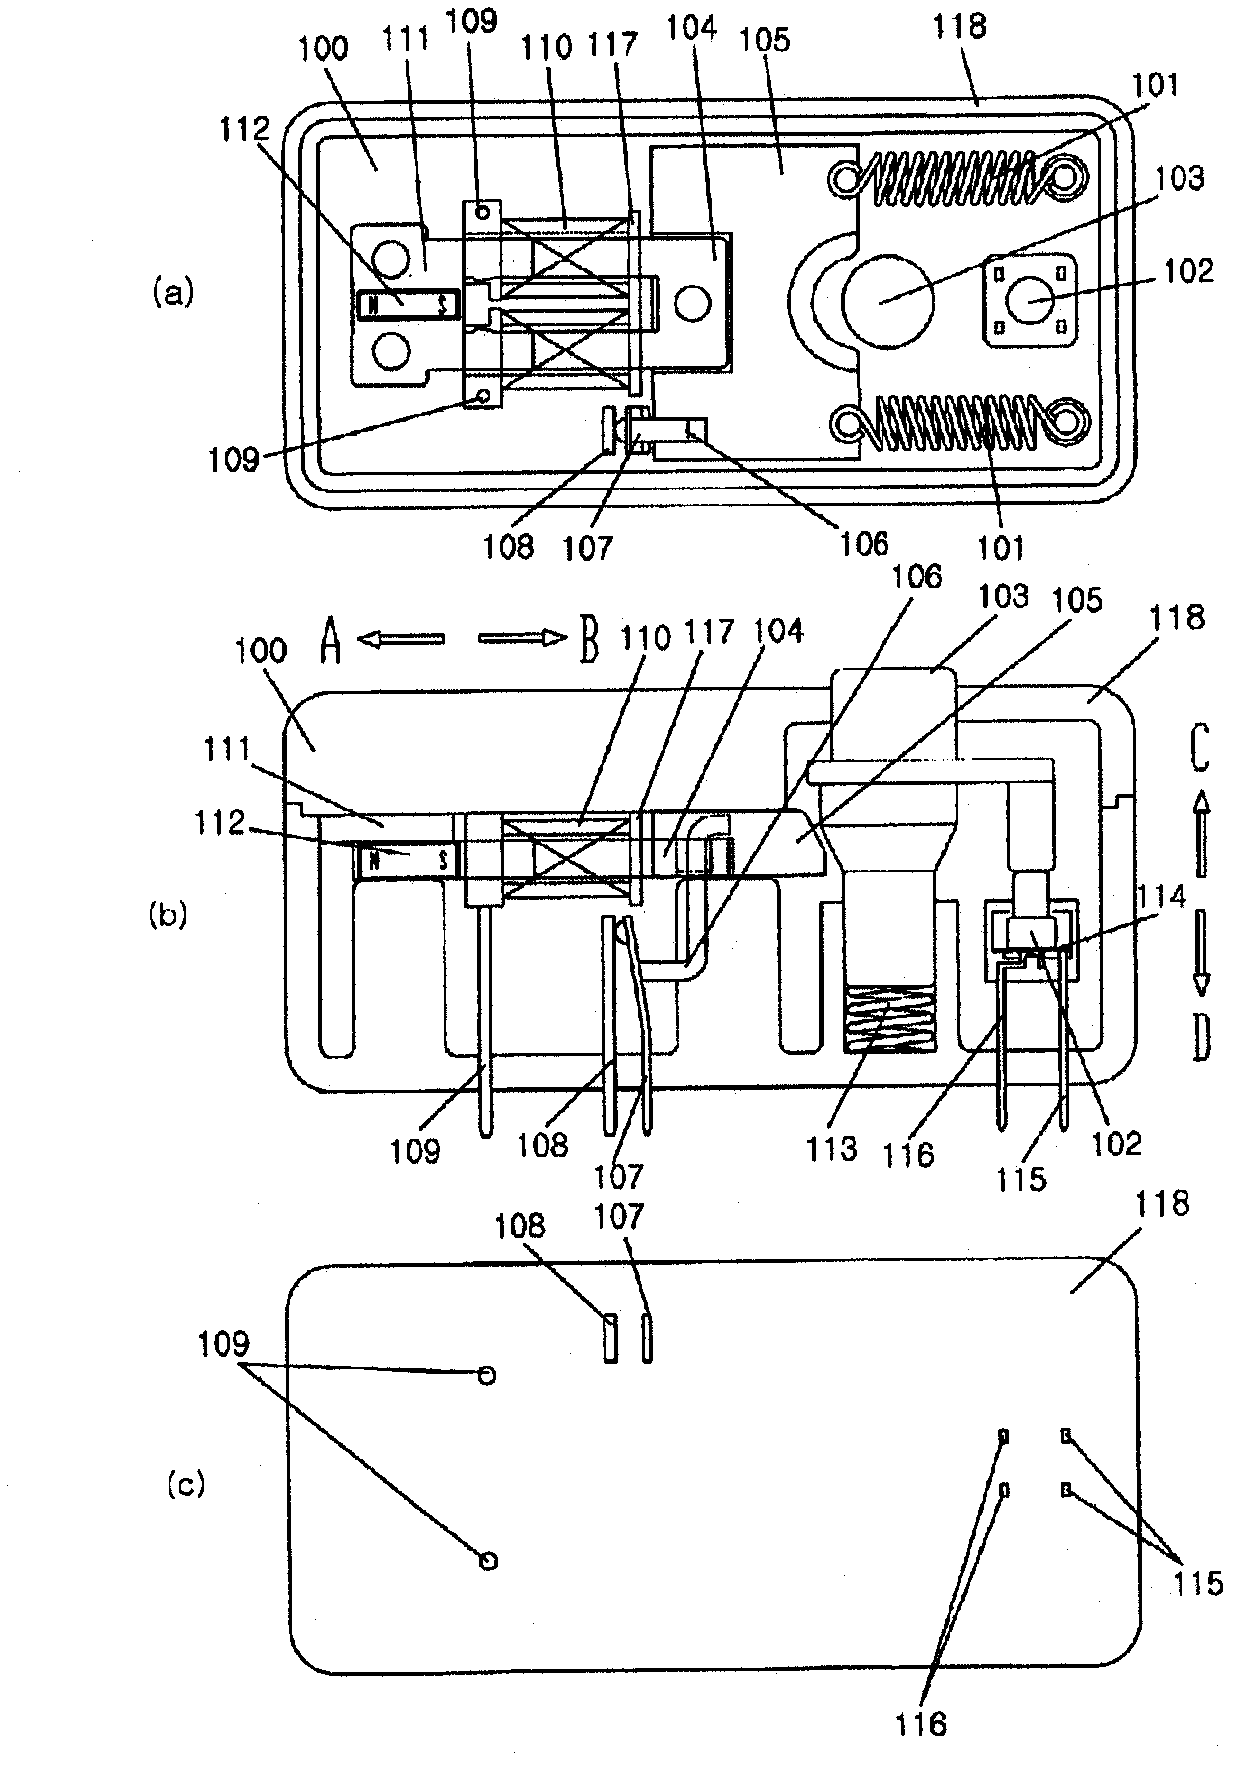 Standby power shut-off device and a control method therefor